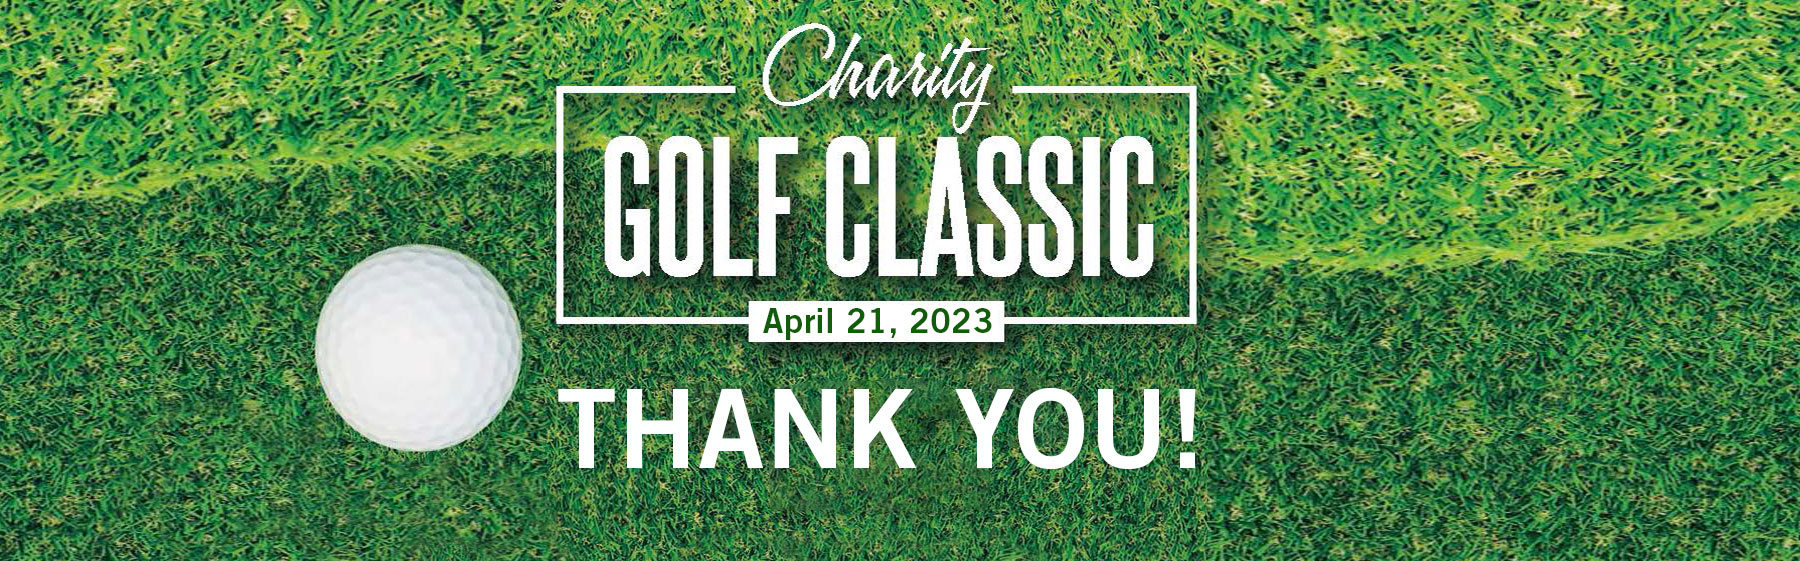 Golf Classic 2023 Text Banner with grass background